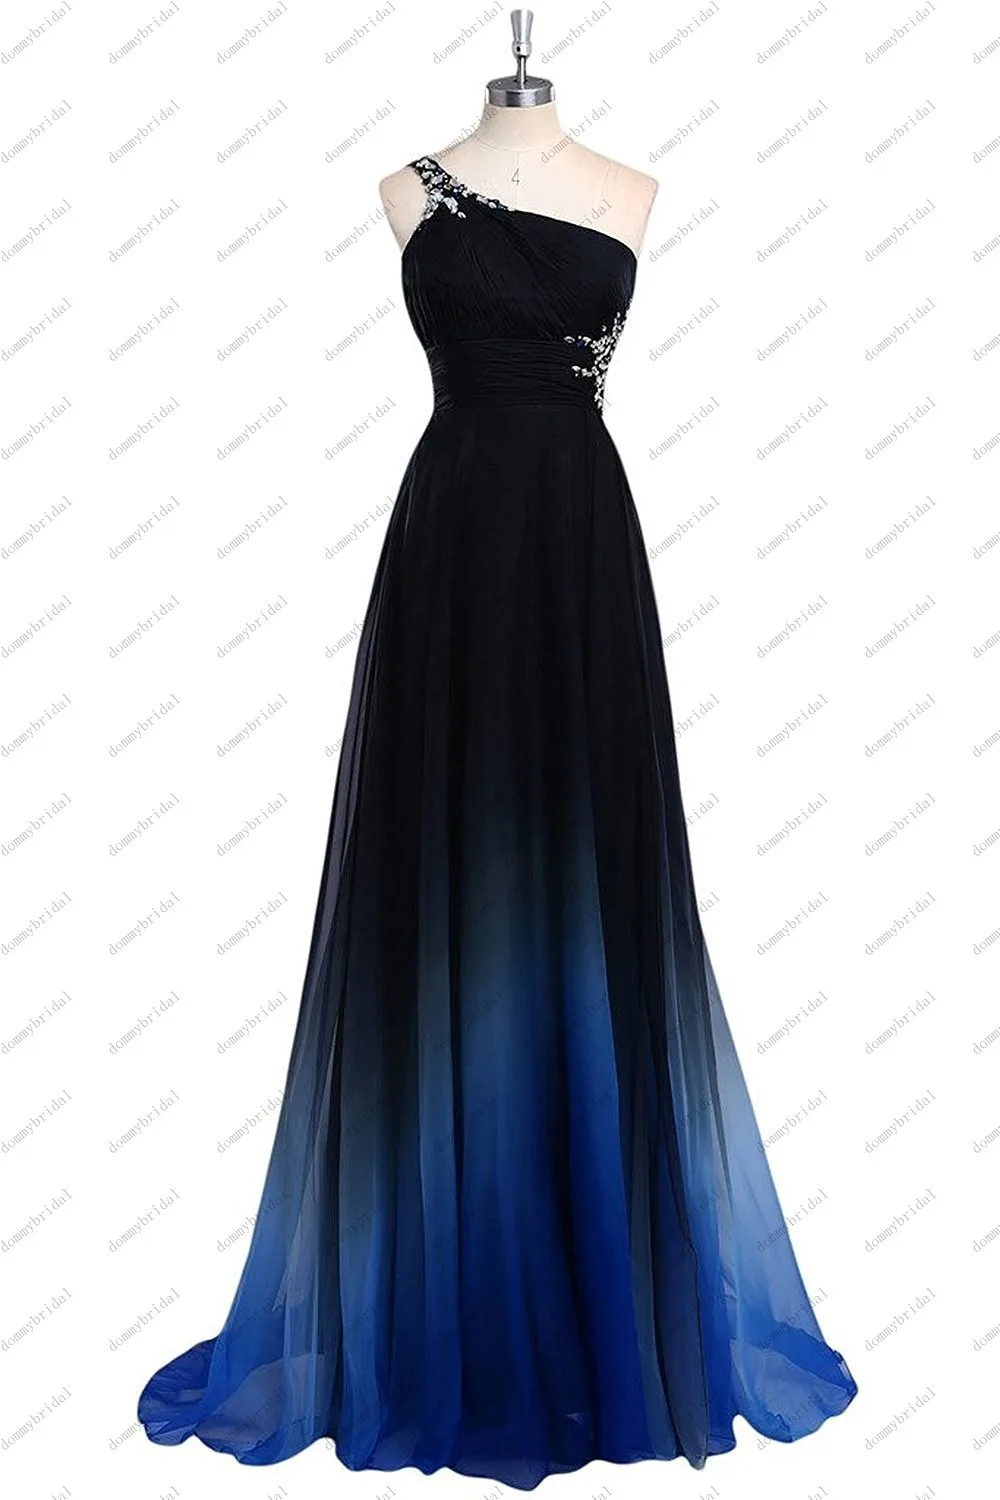 New Chiffon 1 shoulder Formal Ball Gown Evening Party Prom Long Bridesmaid Dress 